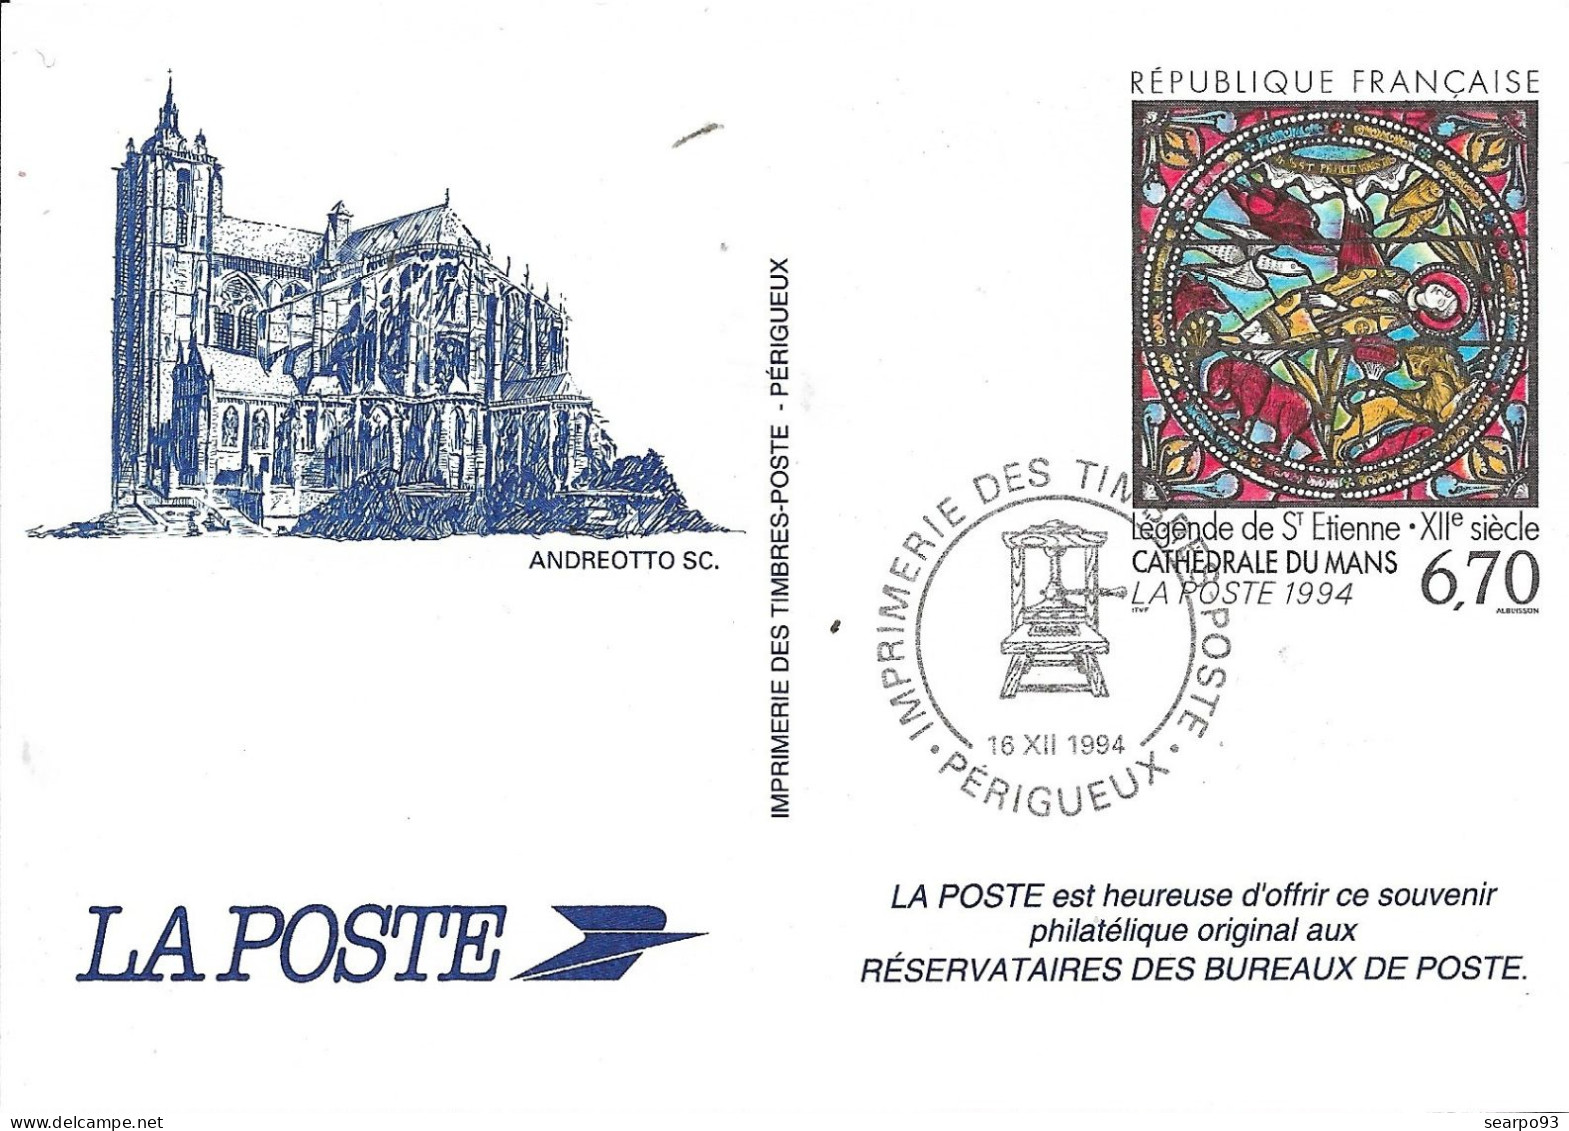 FRANCE. FDC. POSTAGE STAMP PRINTER. PERIGUEUX 1994 - 1990-1999